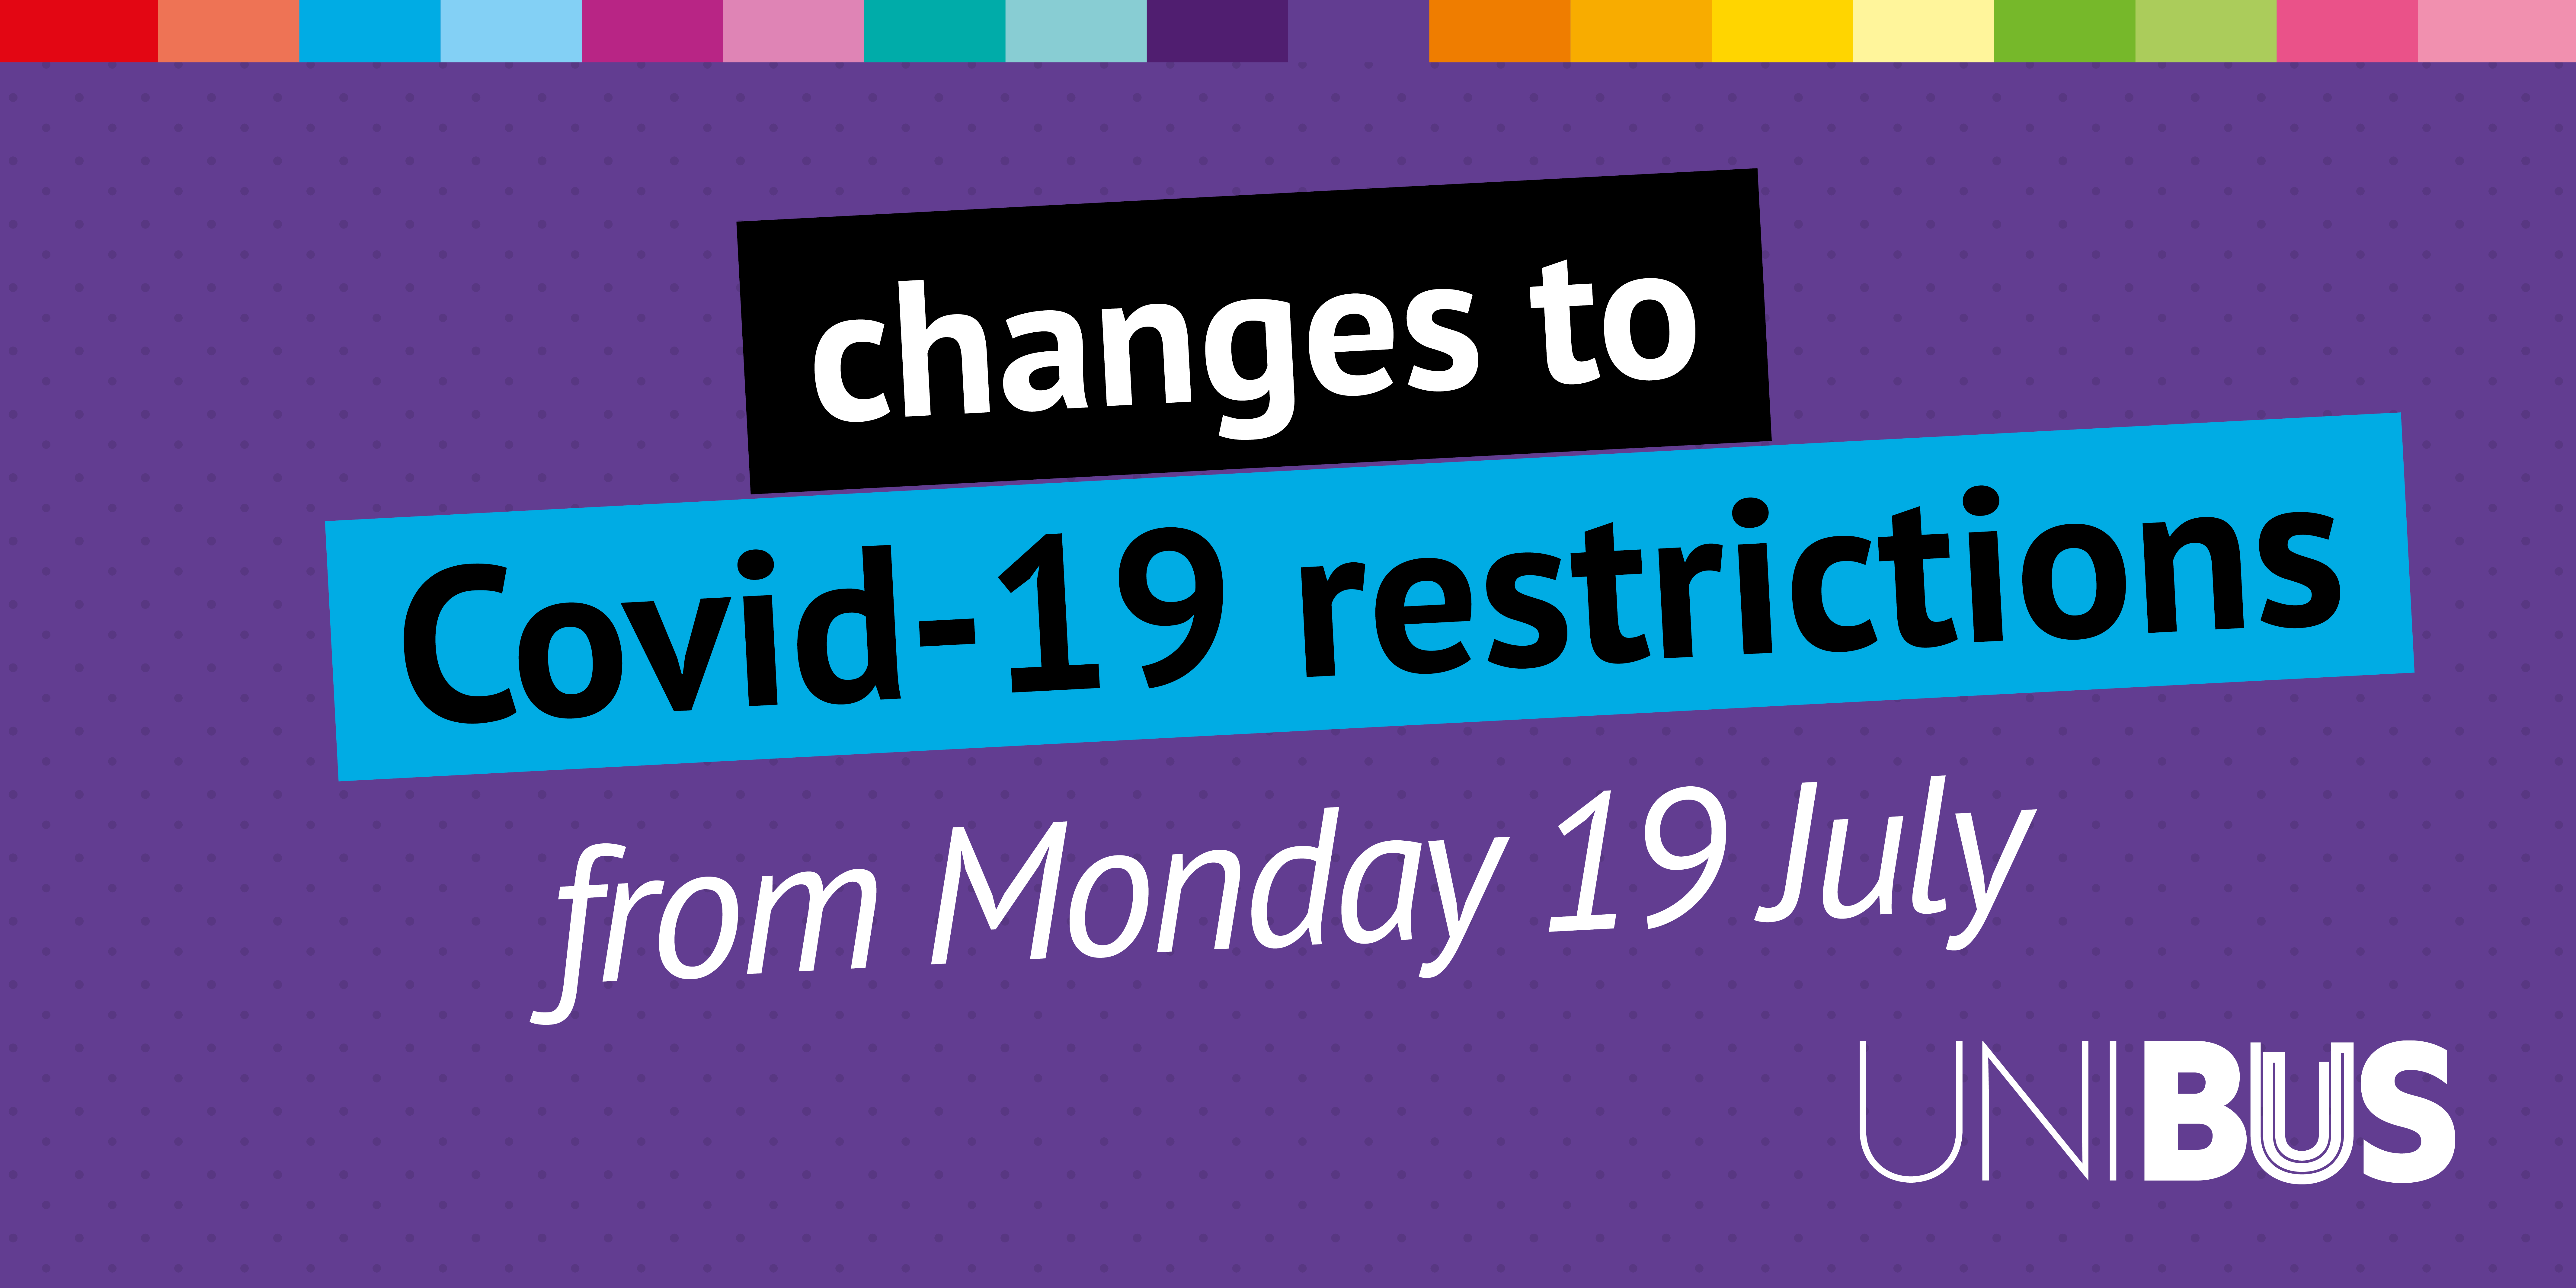 Changes to covid-19 restrictions in text